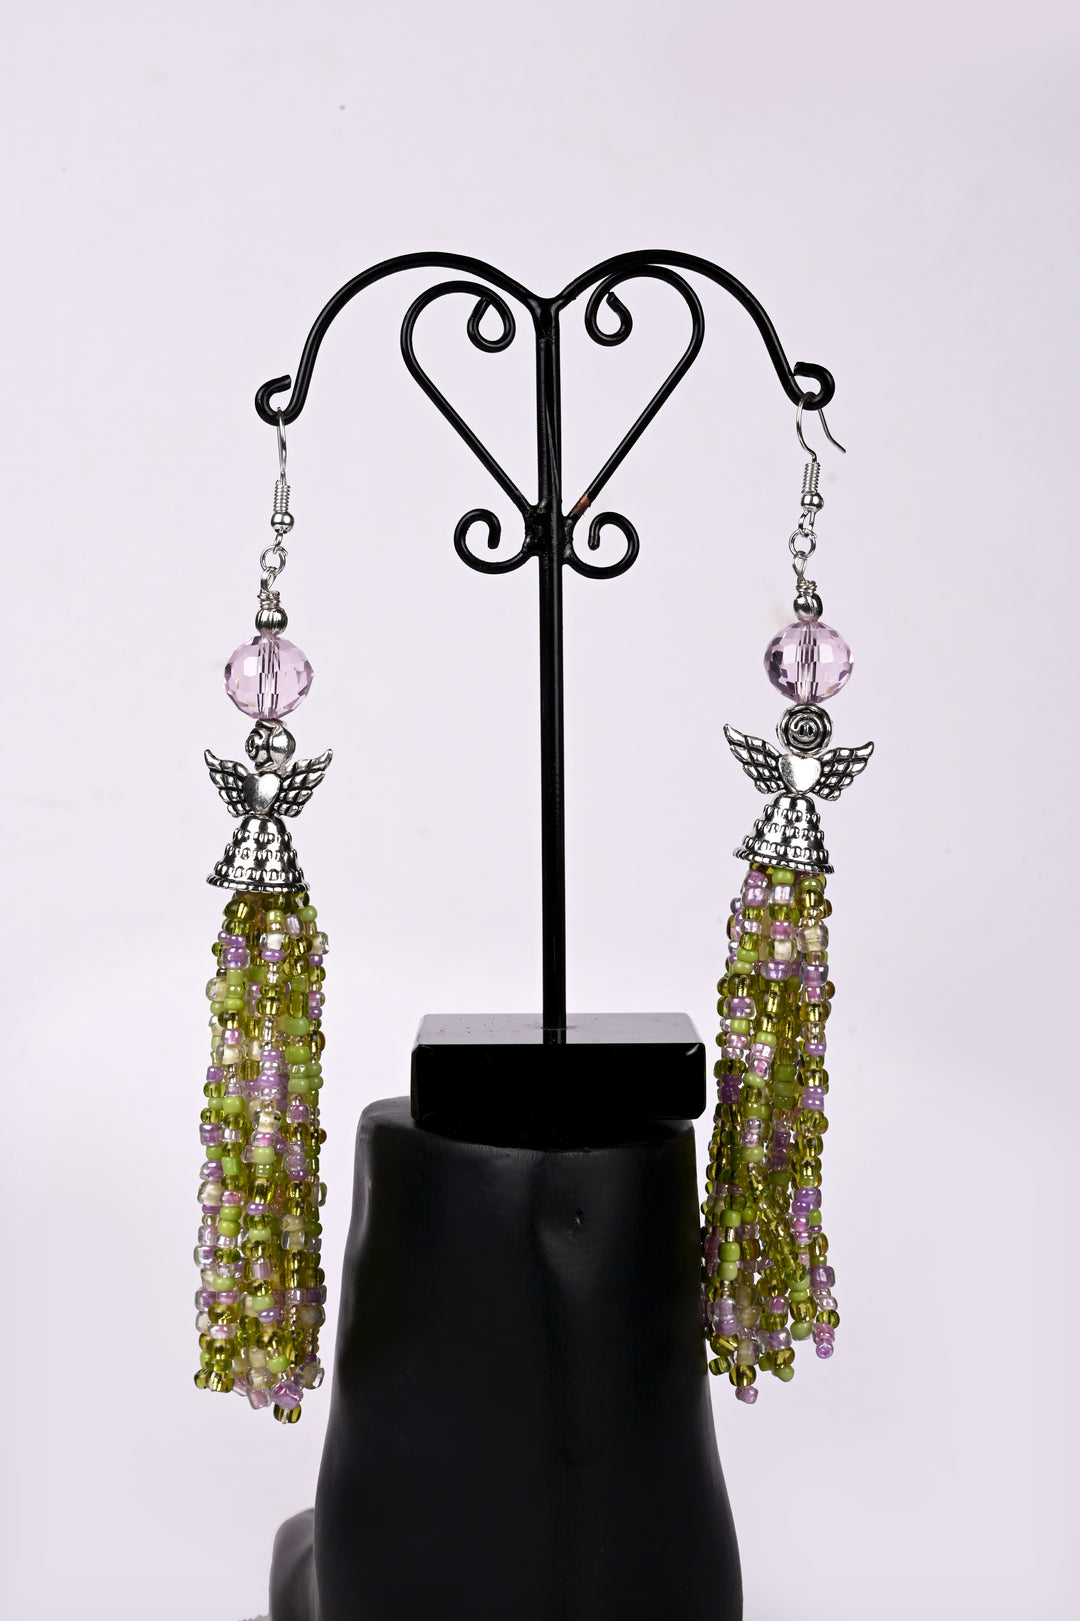 Beautiful Earring Made Of Metal Charms & Faceted Pink Glass Beads & Styled With Multi Layered Multi Colored Glass Seed Beads At The Bottom